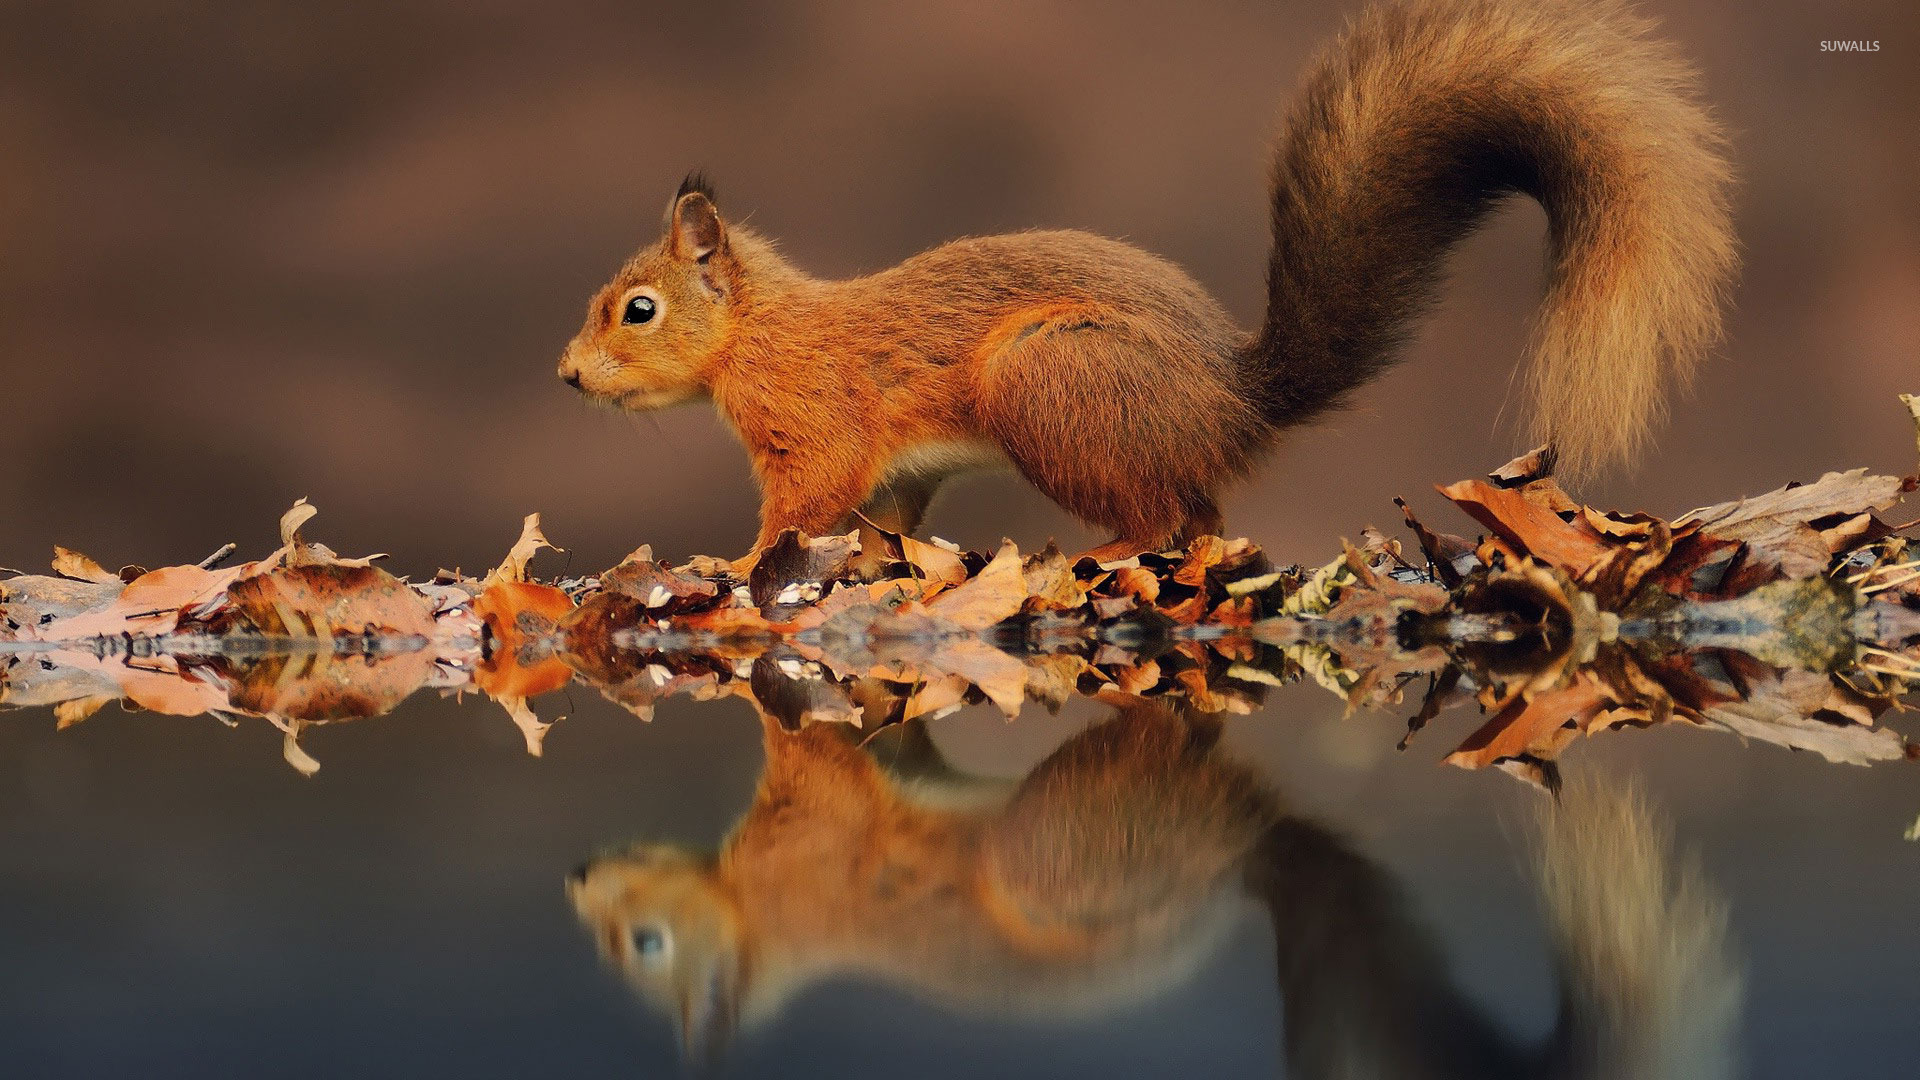 Squirrel reflected in the water wallpaper   Animal